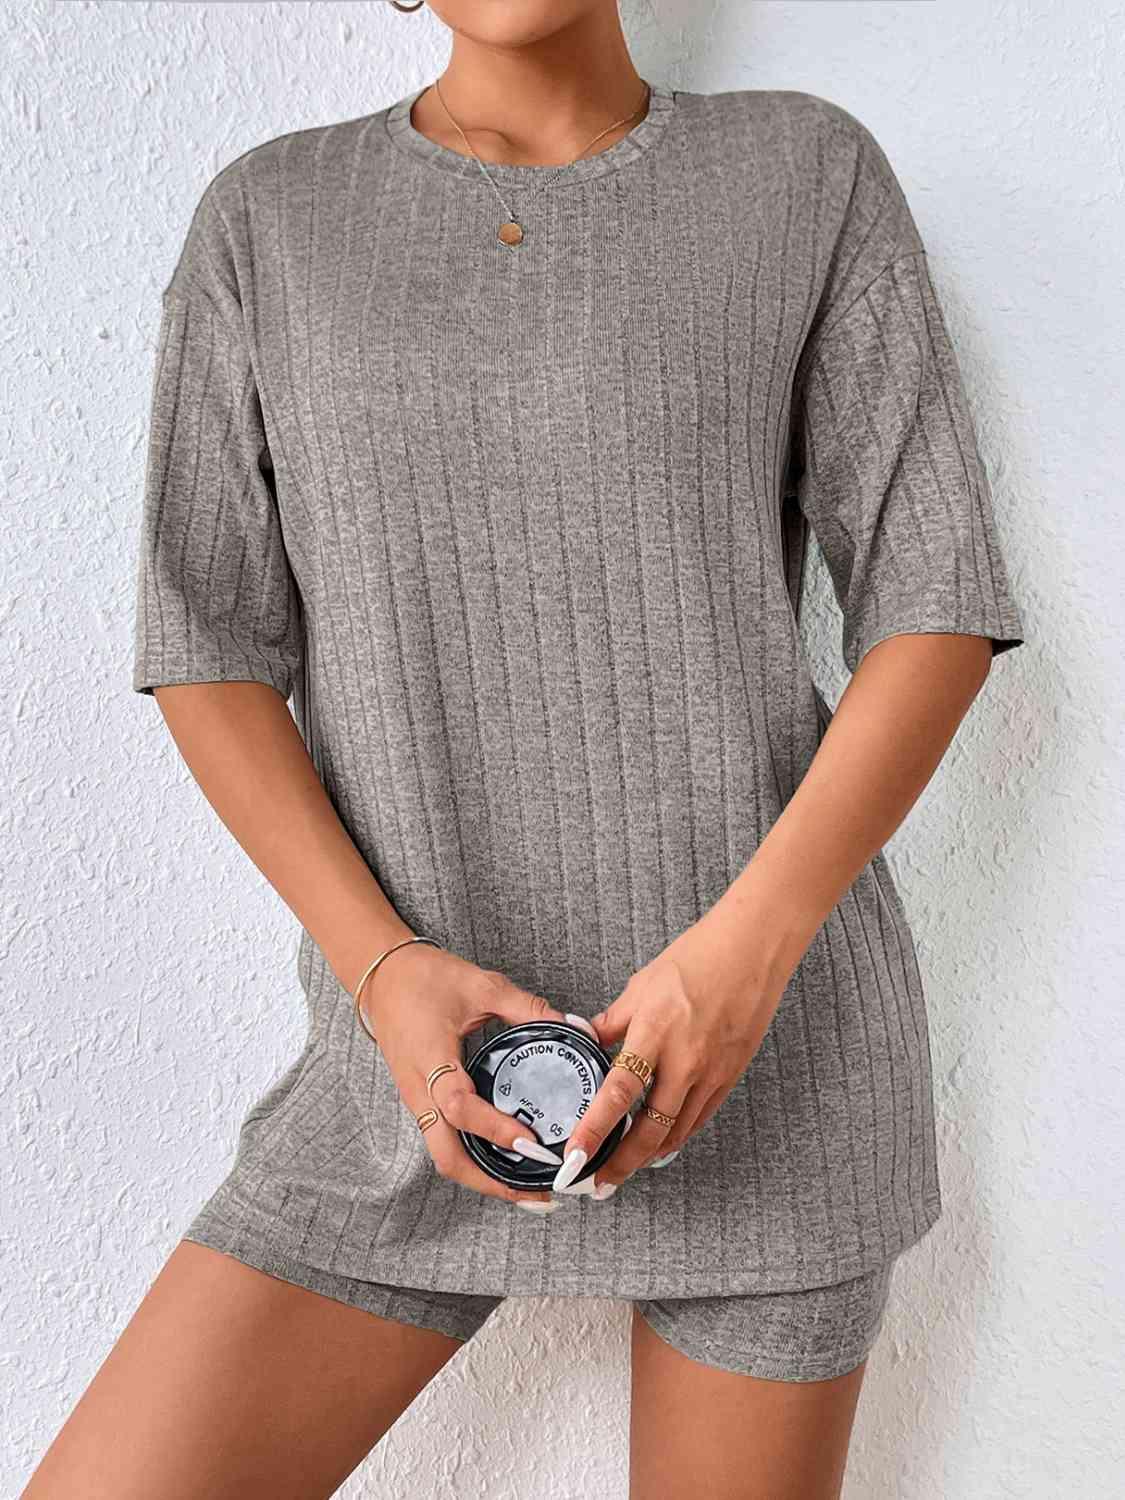 Textured Chic Half Sleeve Top and Shorts Ensemble - God's Girl Gifts And Apparel